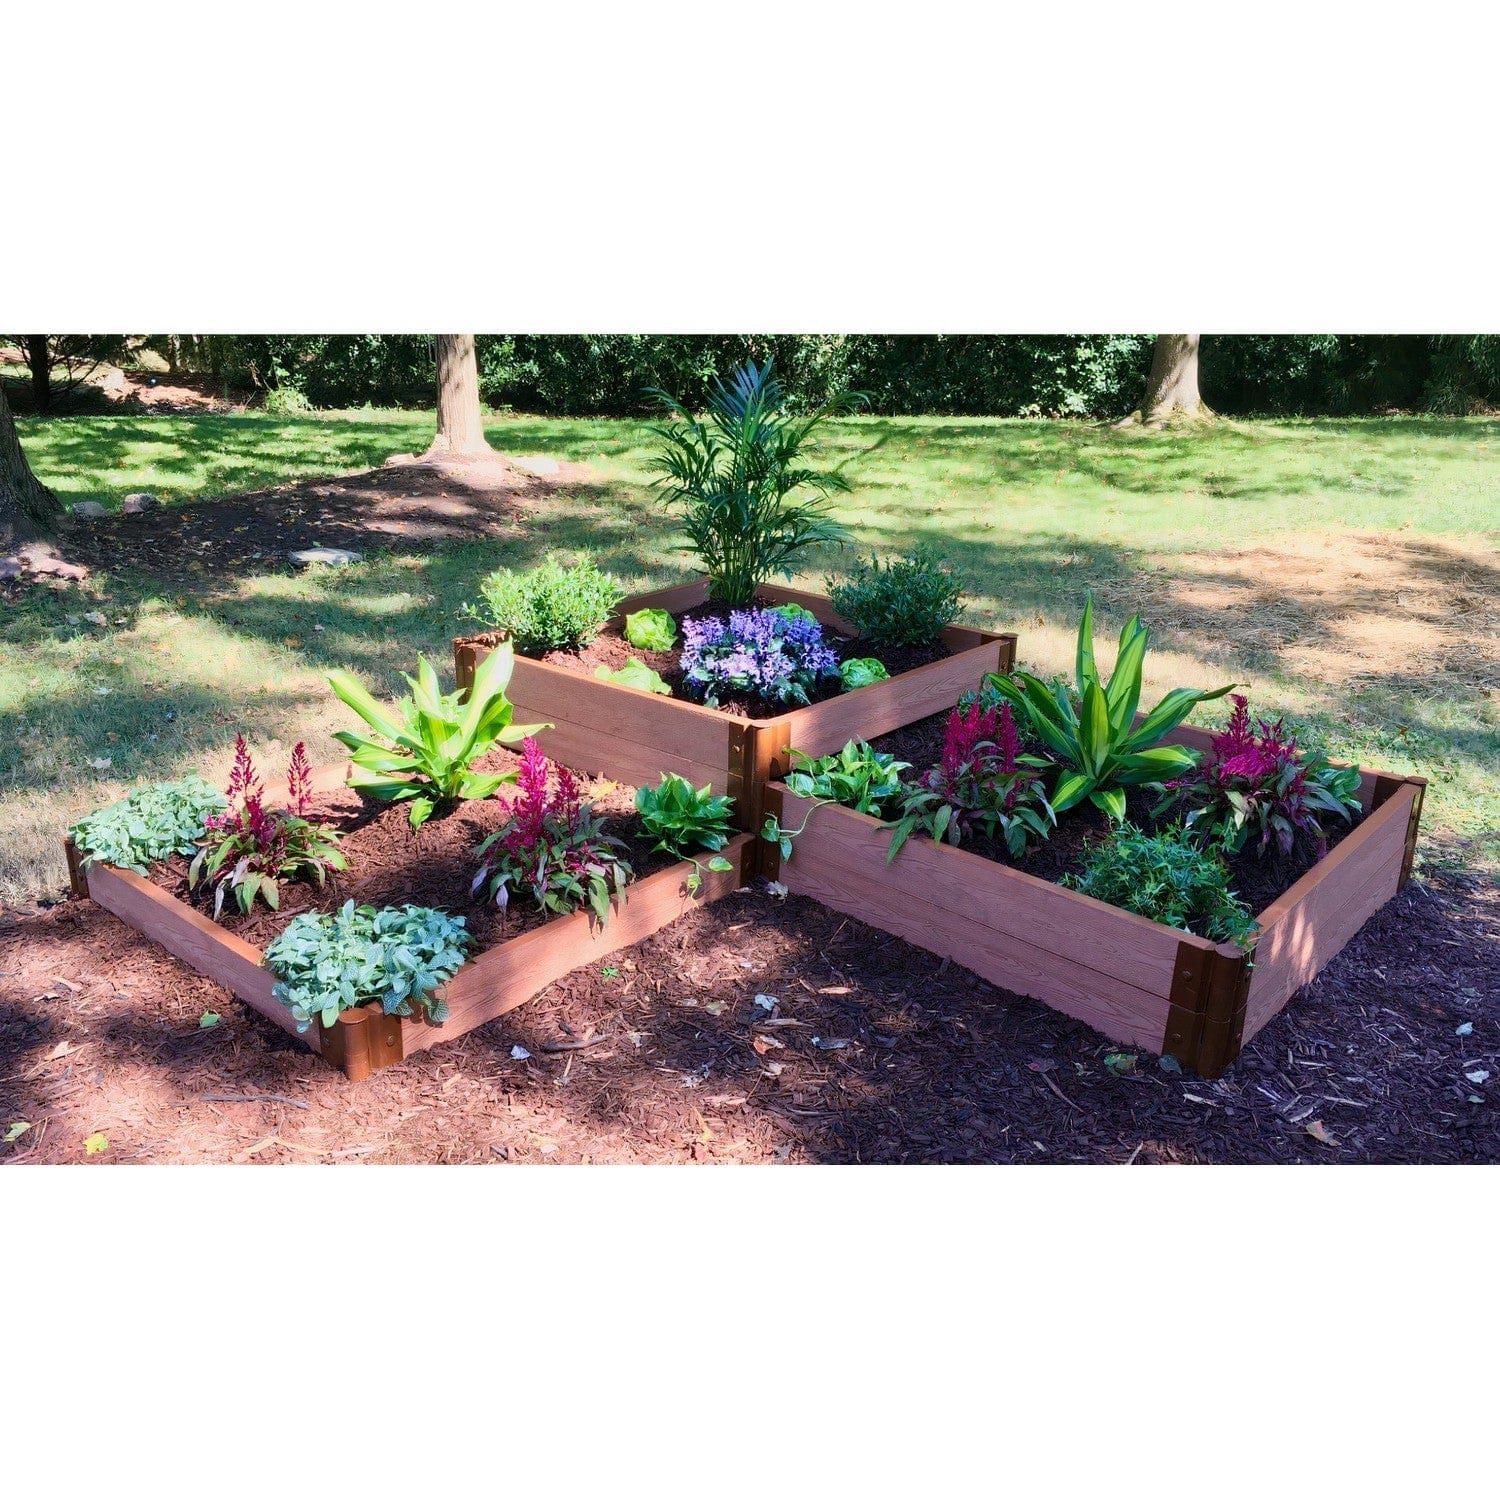 Frame It All Gardening Accessories Frame It All | Tool-Free Fort Knox Straight Corner Raised Garden Bed (Tri-Level) 8' X 8' X 22" - Weathered Wood - 1" Profile 800002022